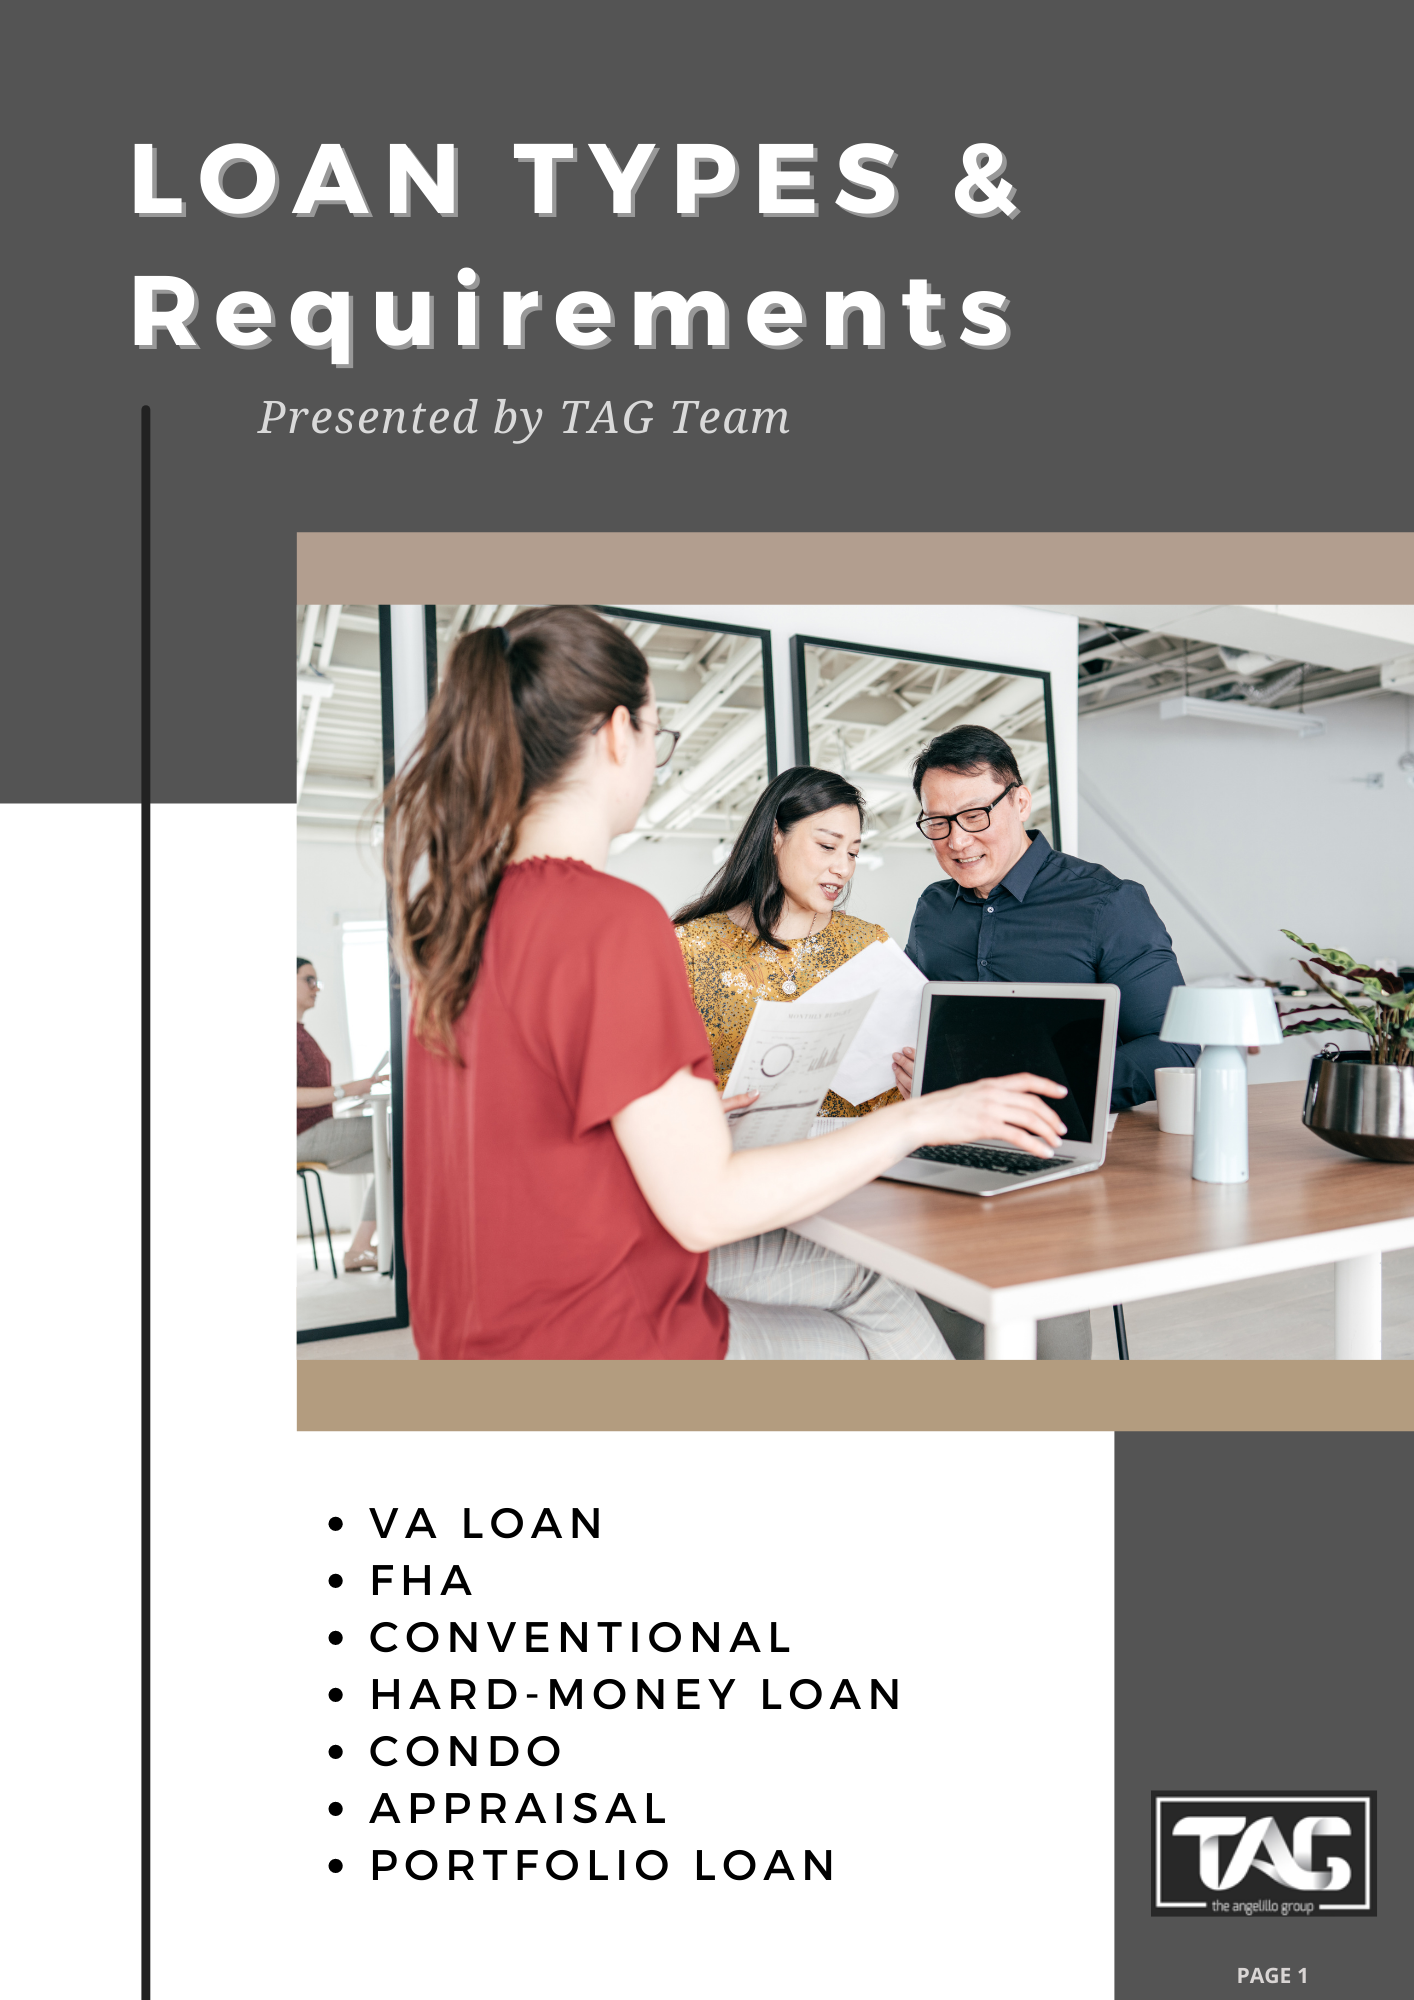 Tagteam LOAN TYPES & Requirements